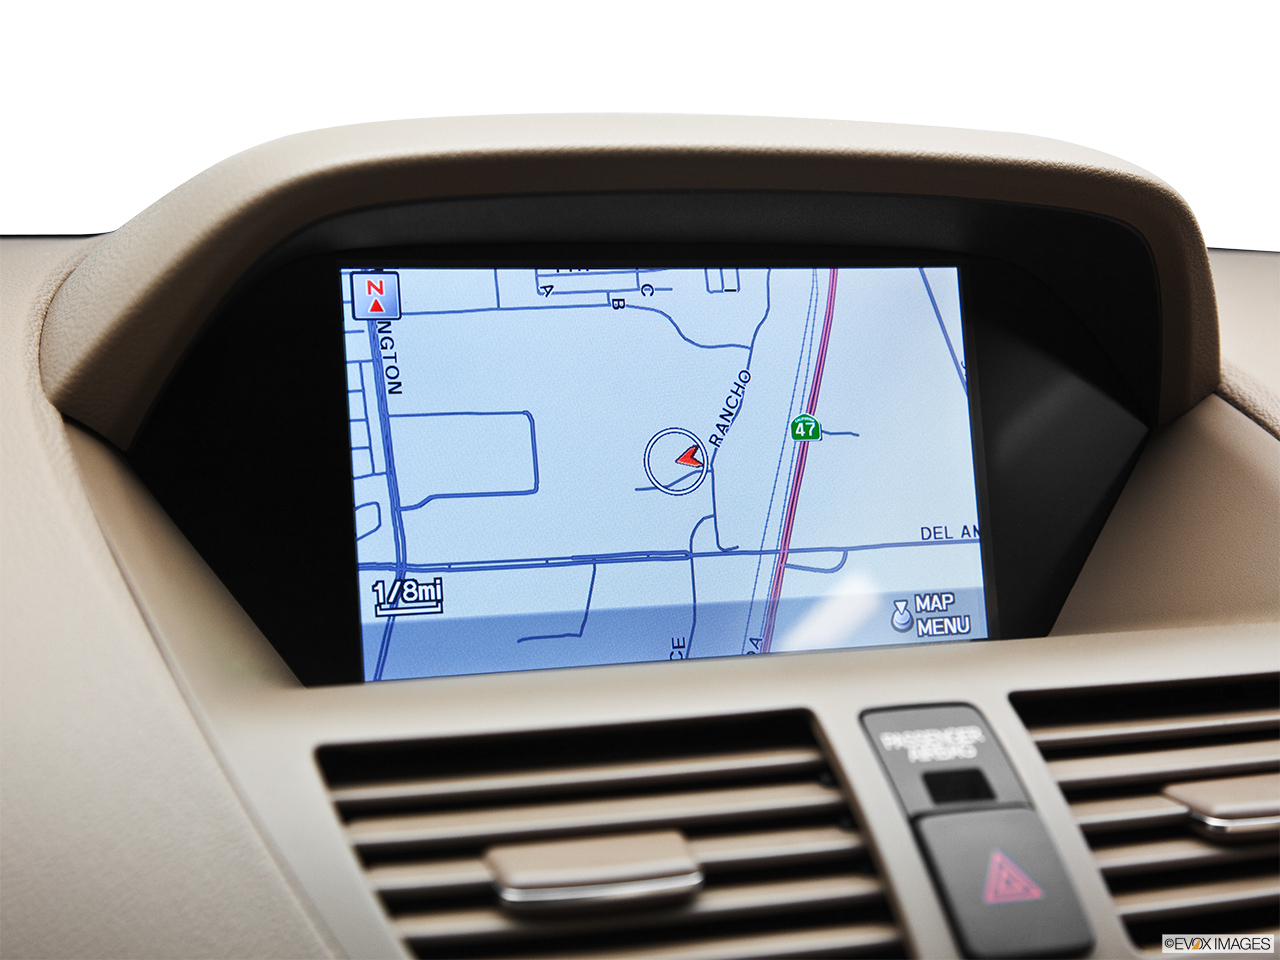 2012 Acura MDX MDX Driver position view of navigation system. 